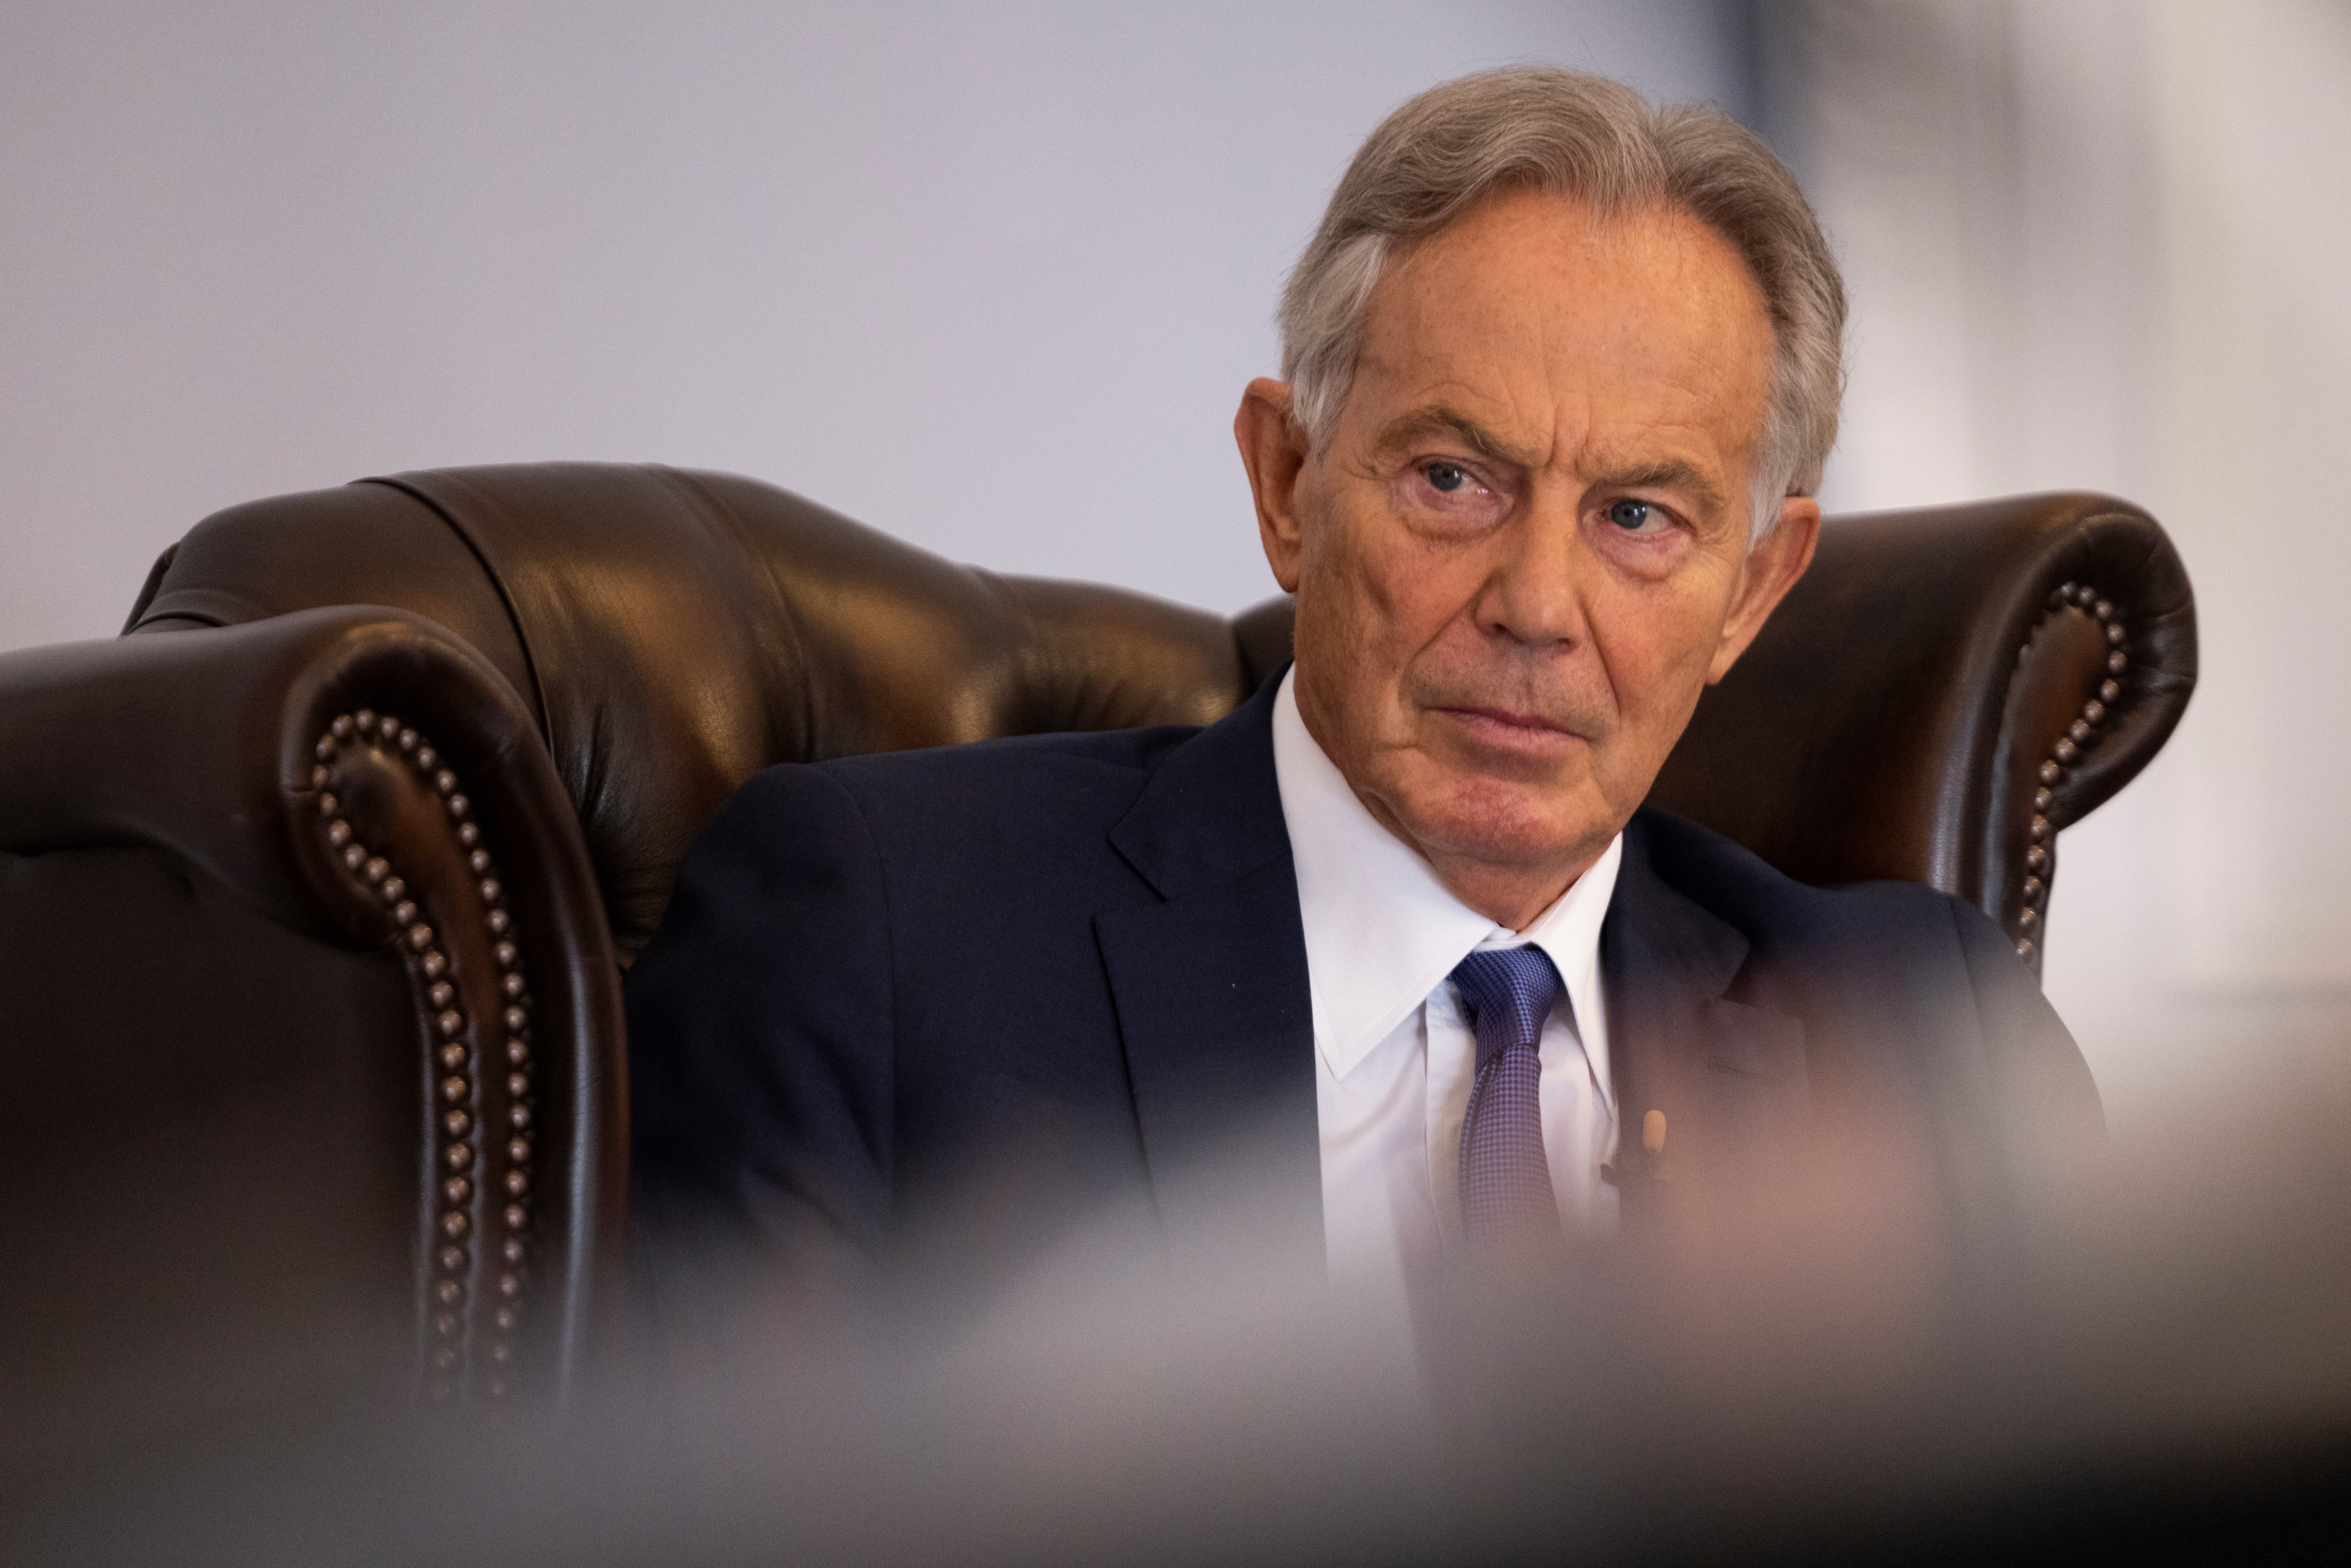 Blair presented New Labour as a broad-based party committed to social justice